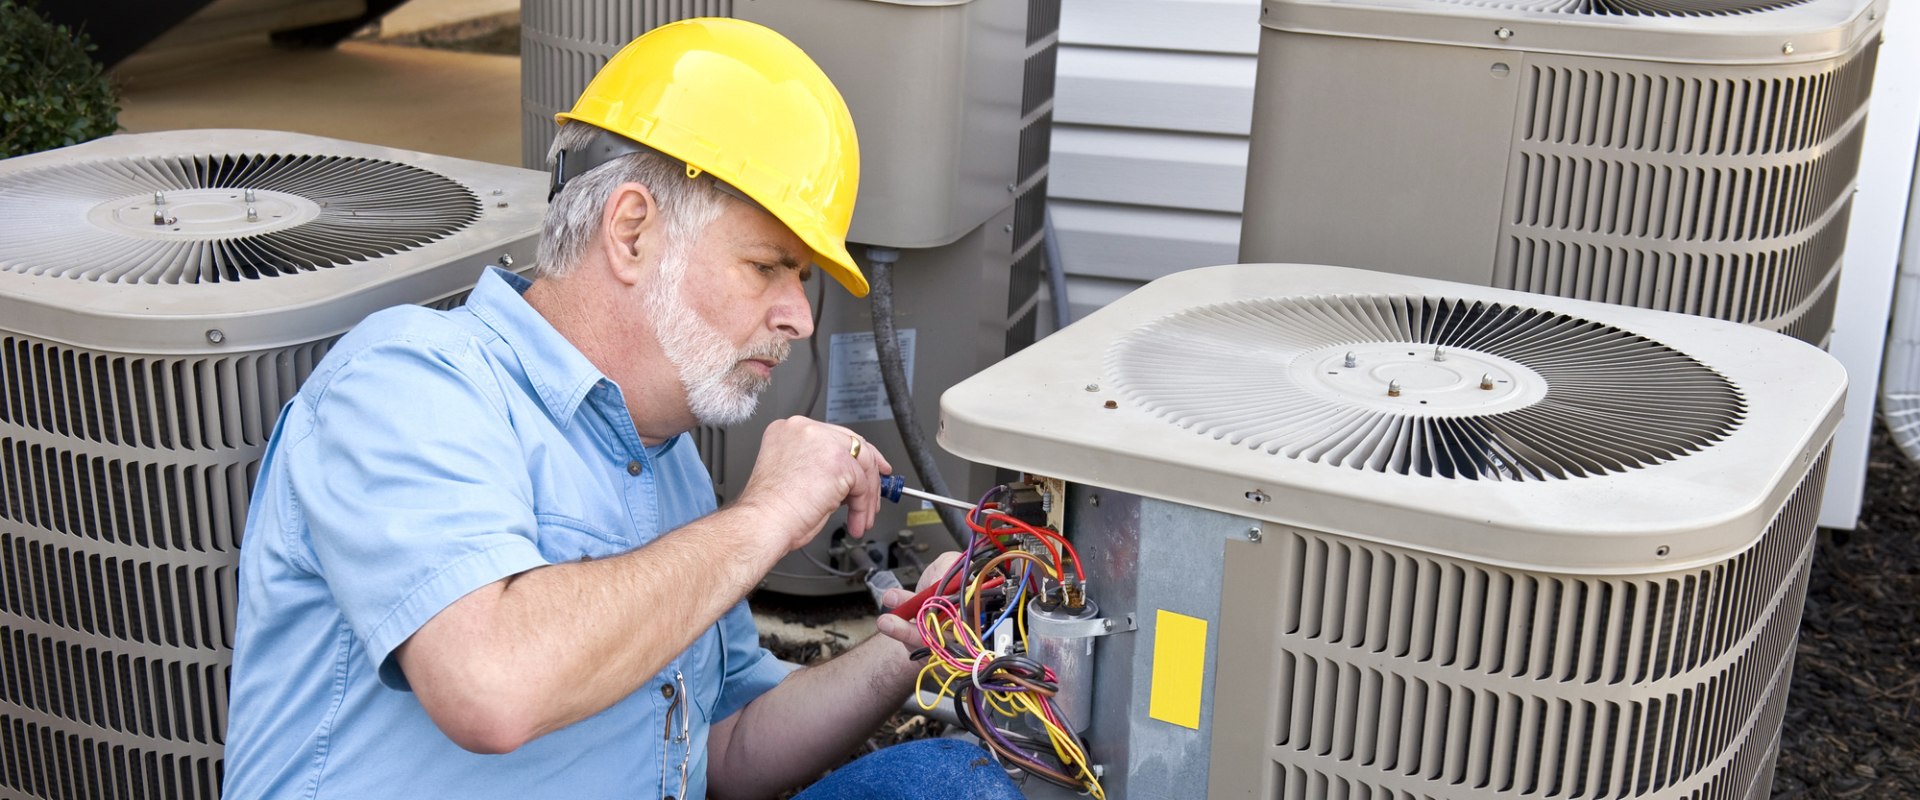 The Benefits of Preventive Maintenance for HVAC Systems